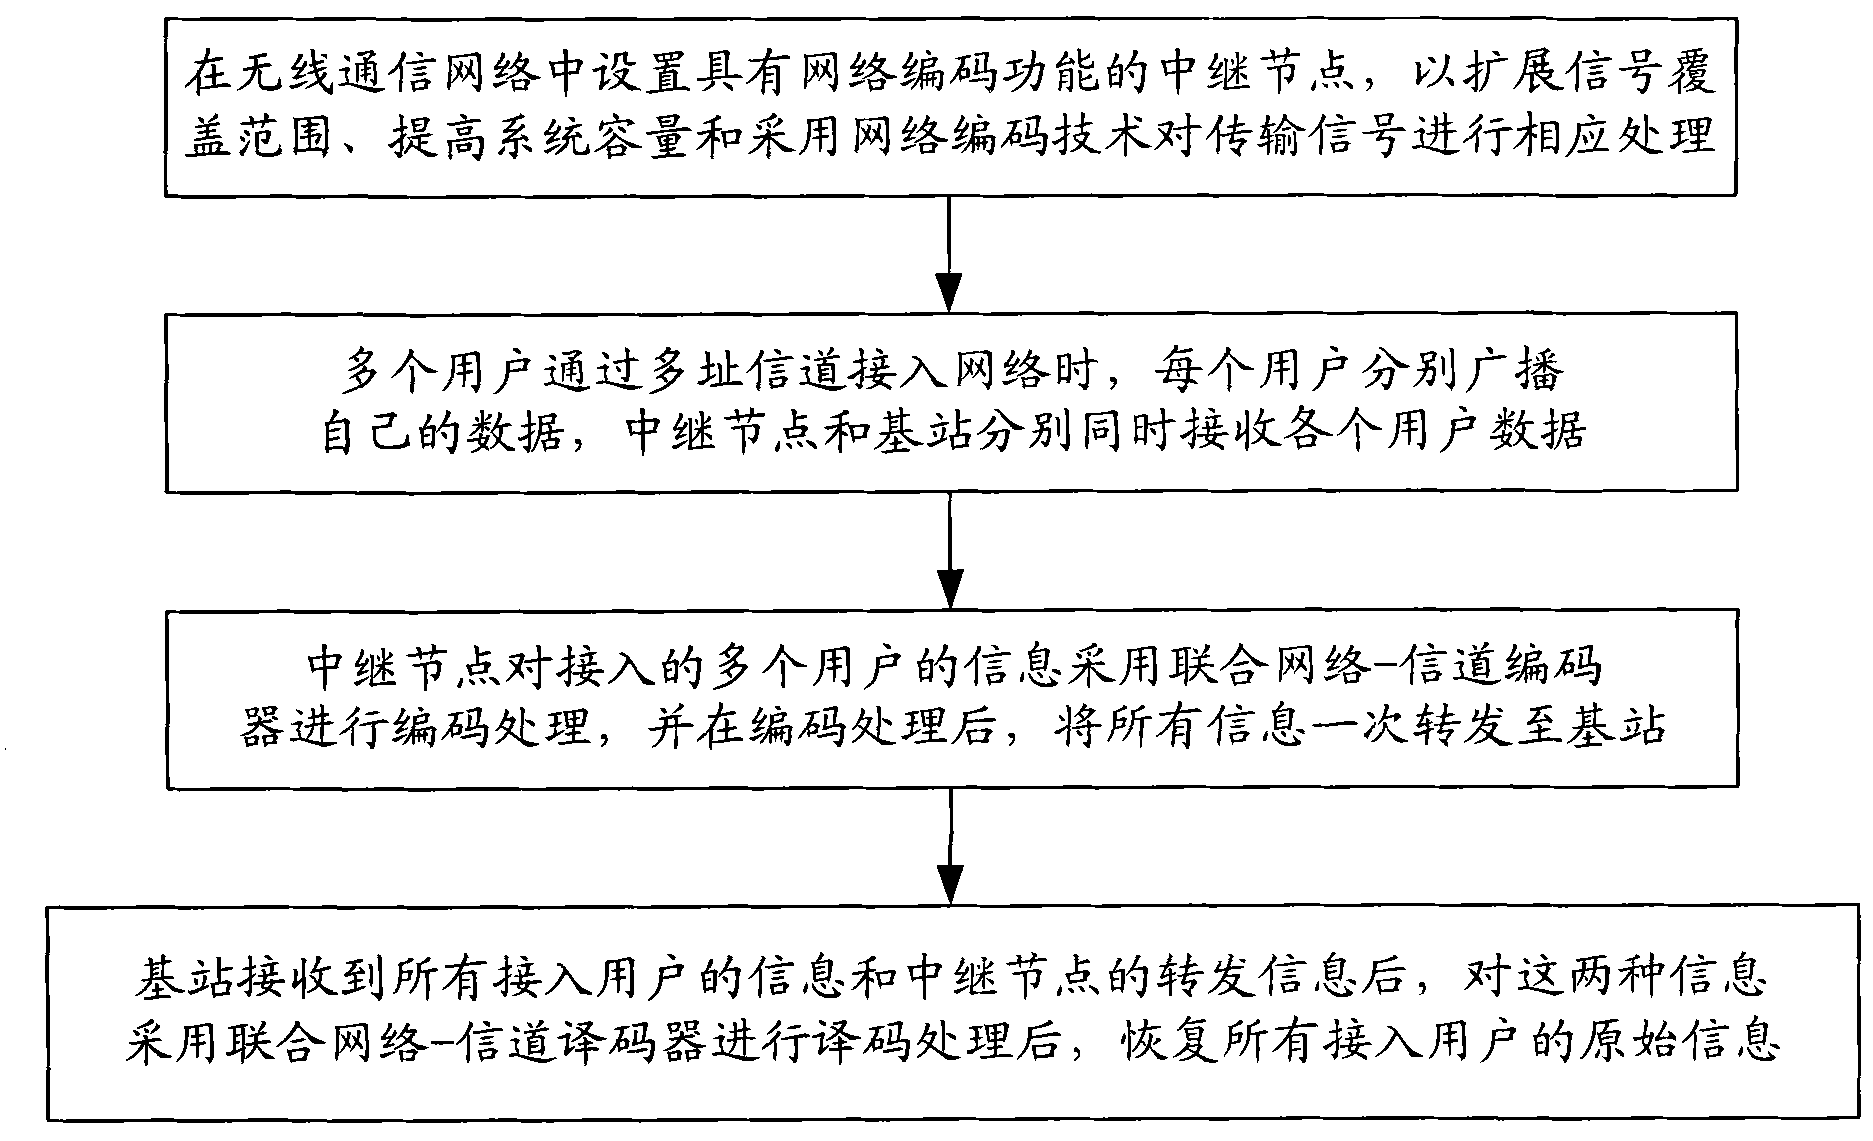 Multi-user network coding communication method with high-speed parallel encoding and decoding structure